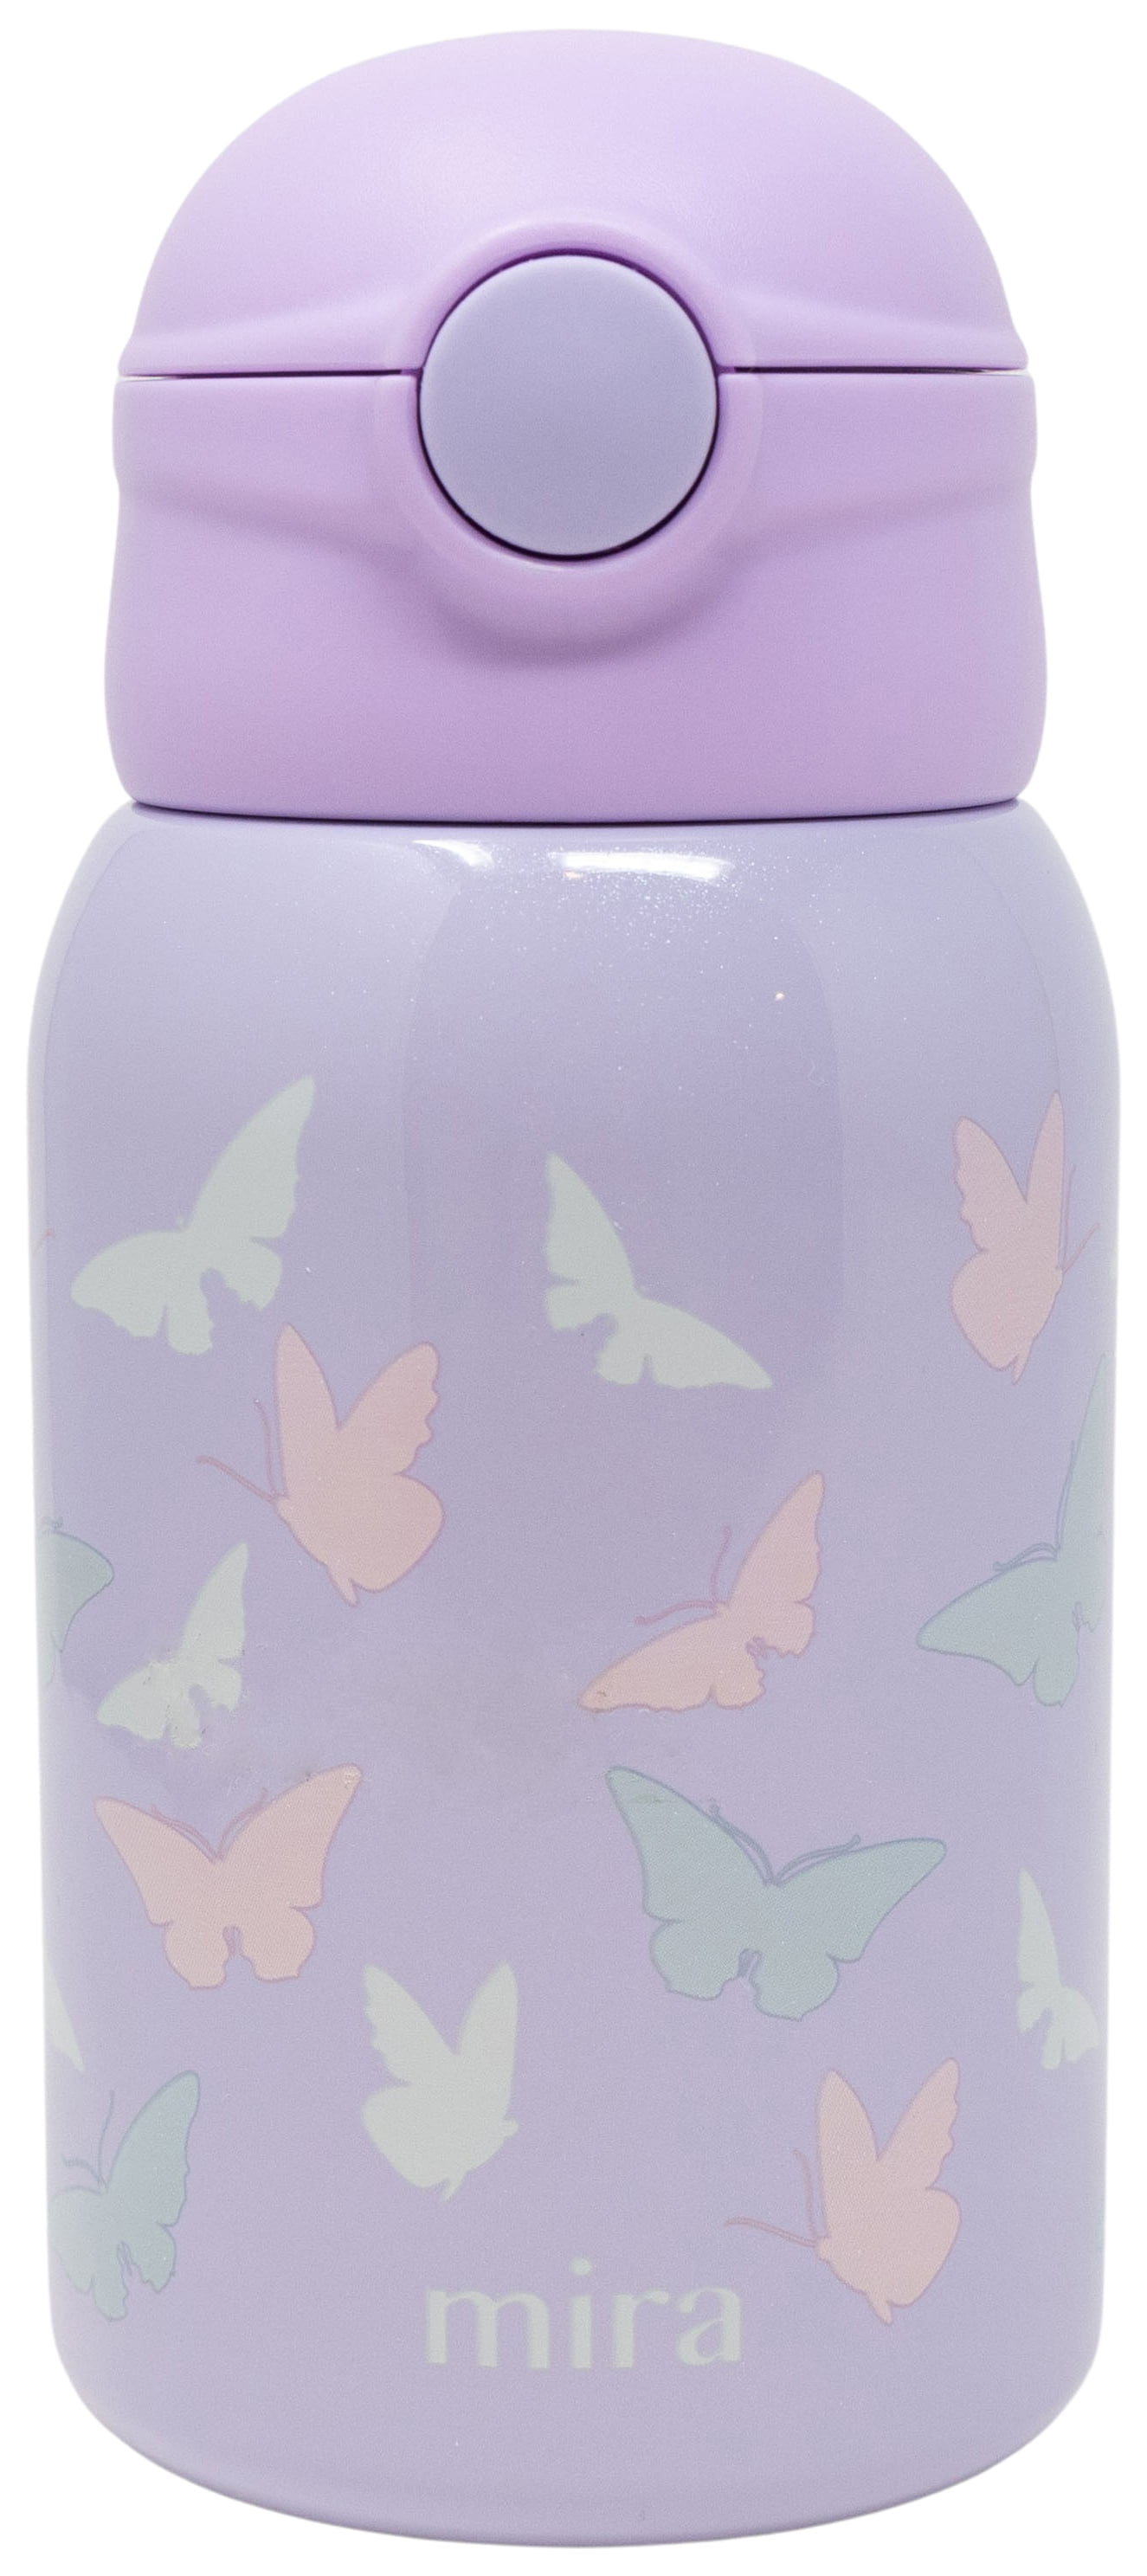 MIRA 15oz Insulated Kids Water Bottle with Straw, One Touch Lid, Stainless  Steel, Planets